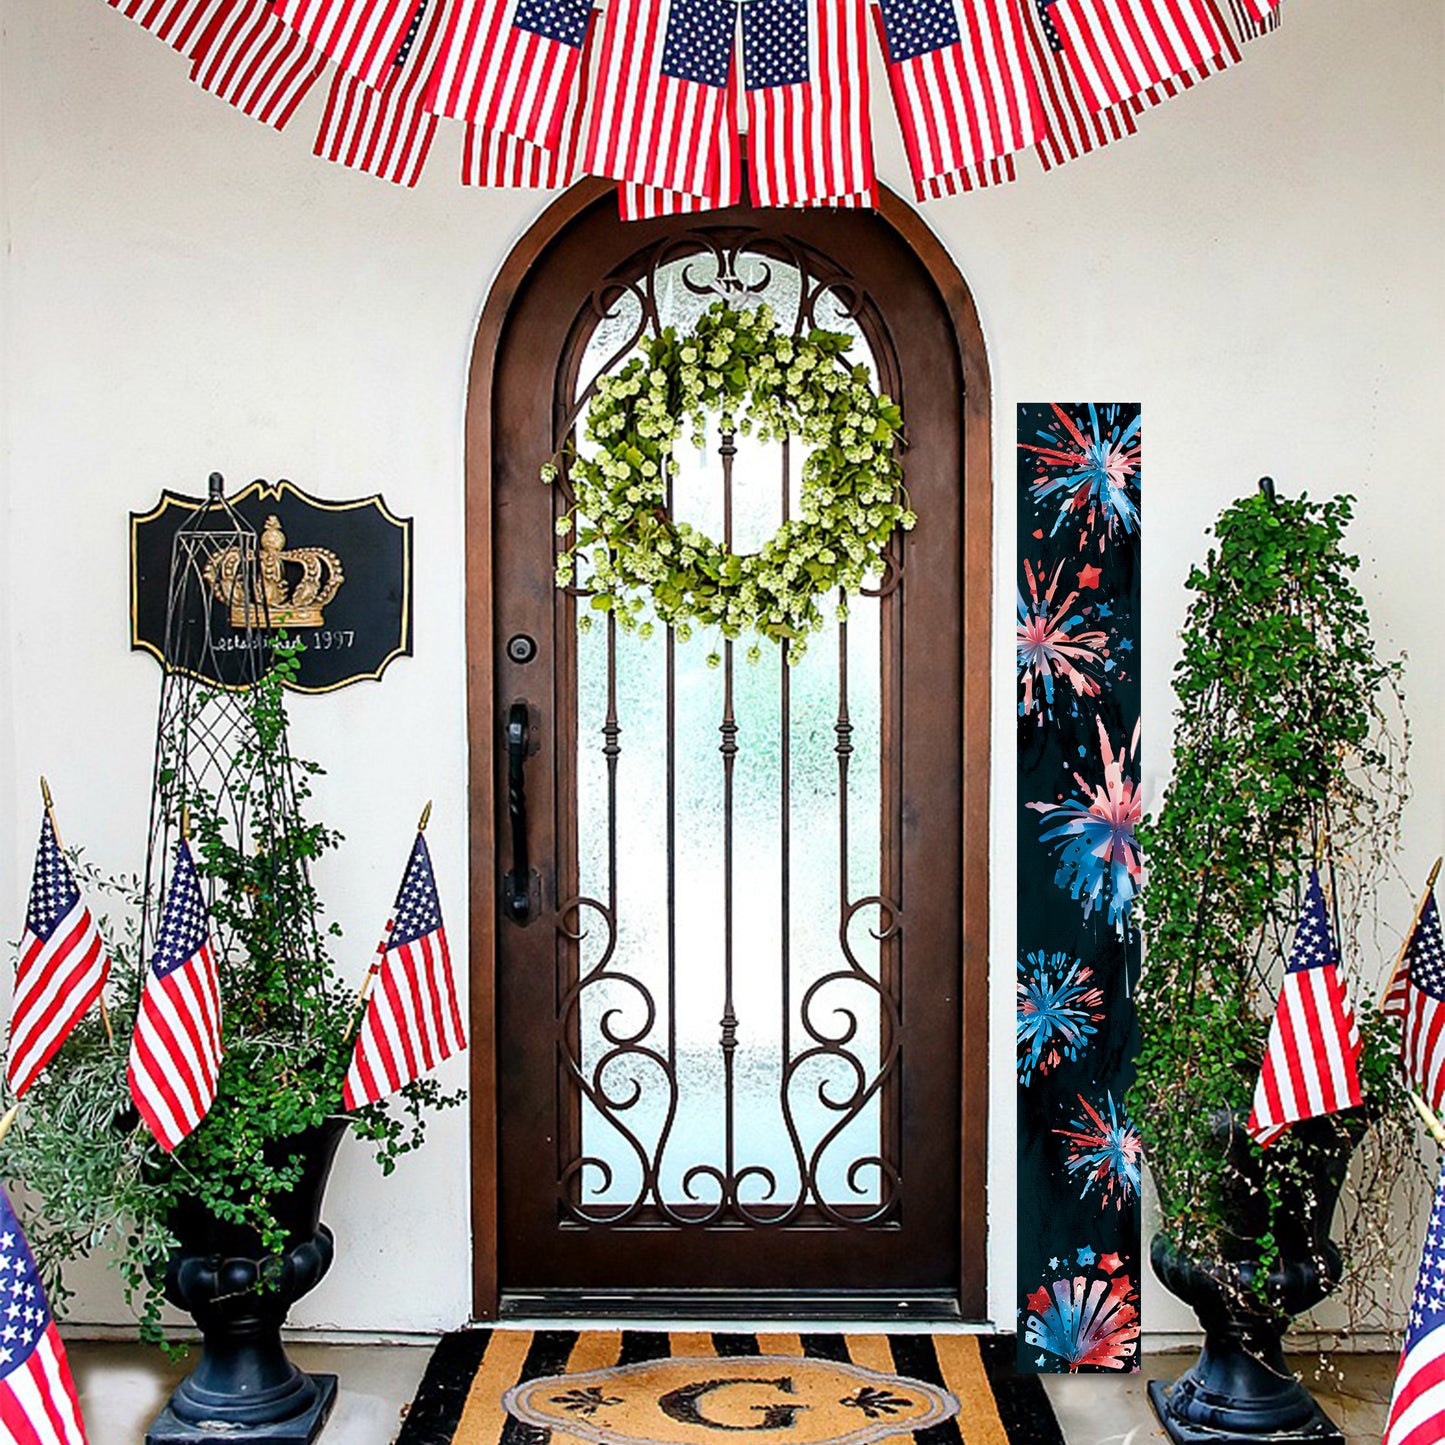 72in Firework Pattern Porch Sign - Patriotic Wooden Porch Decor - 4th of July Decor for Front Door | Independence Day Outdoor Decor